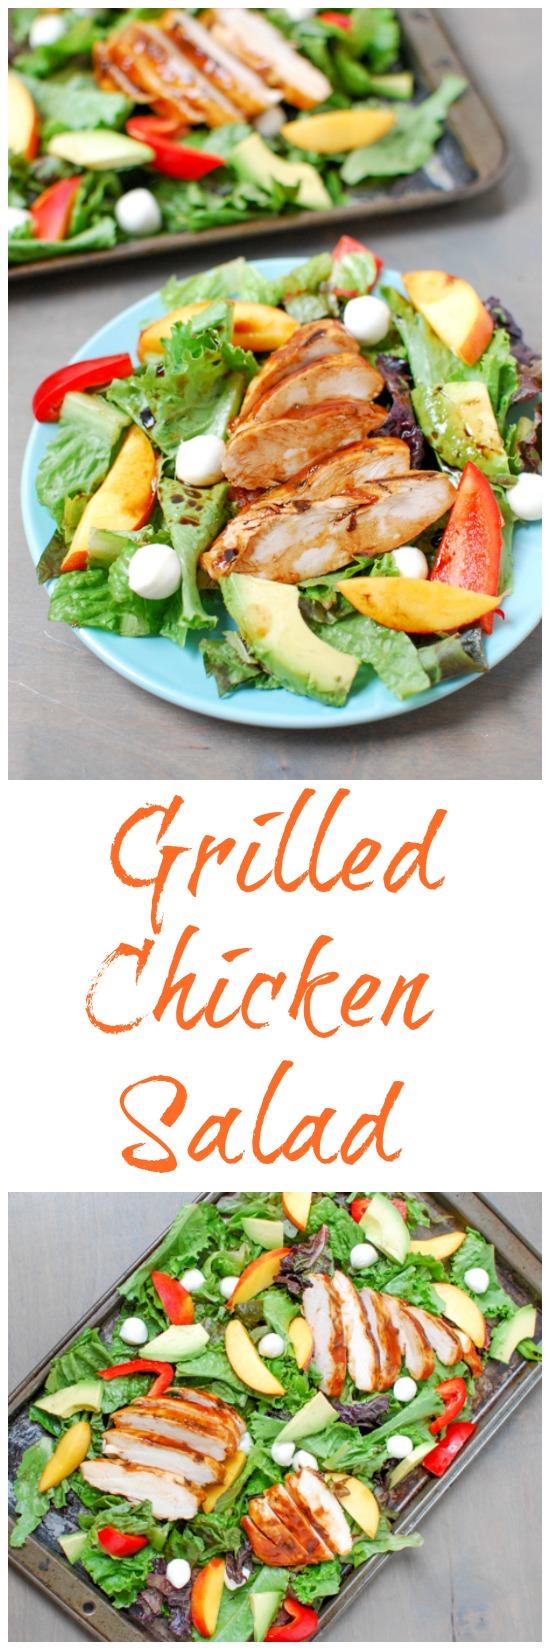 A light and fresh summer lunch or dinner, this Grilled BBQ Chicken Salad is simple, healthy and full of flavor!